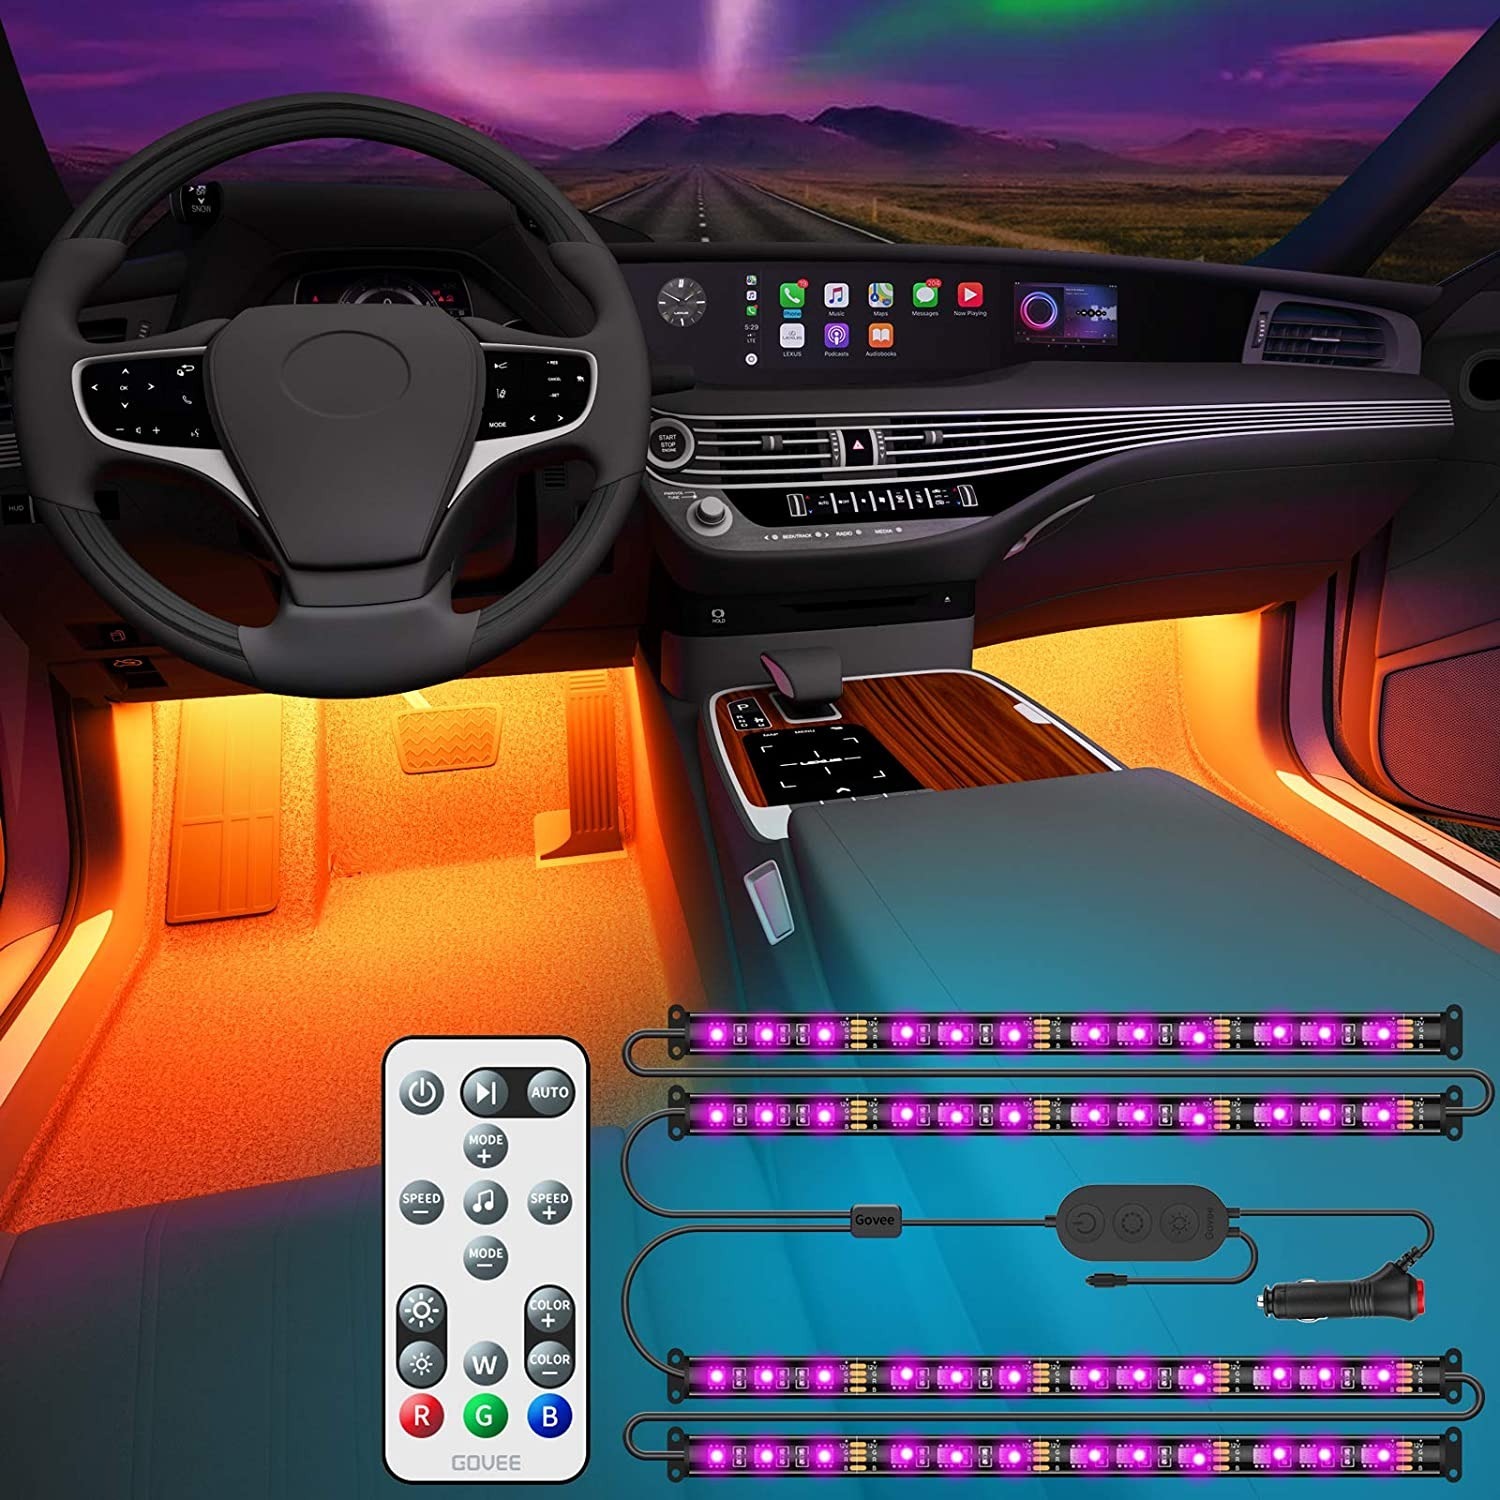 Govee RGB Car LED Lights with 32 Colors $6.99 + FS w/PRIME